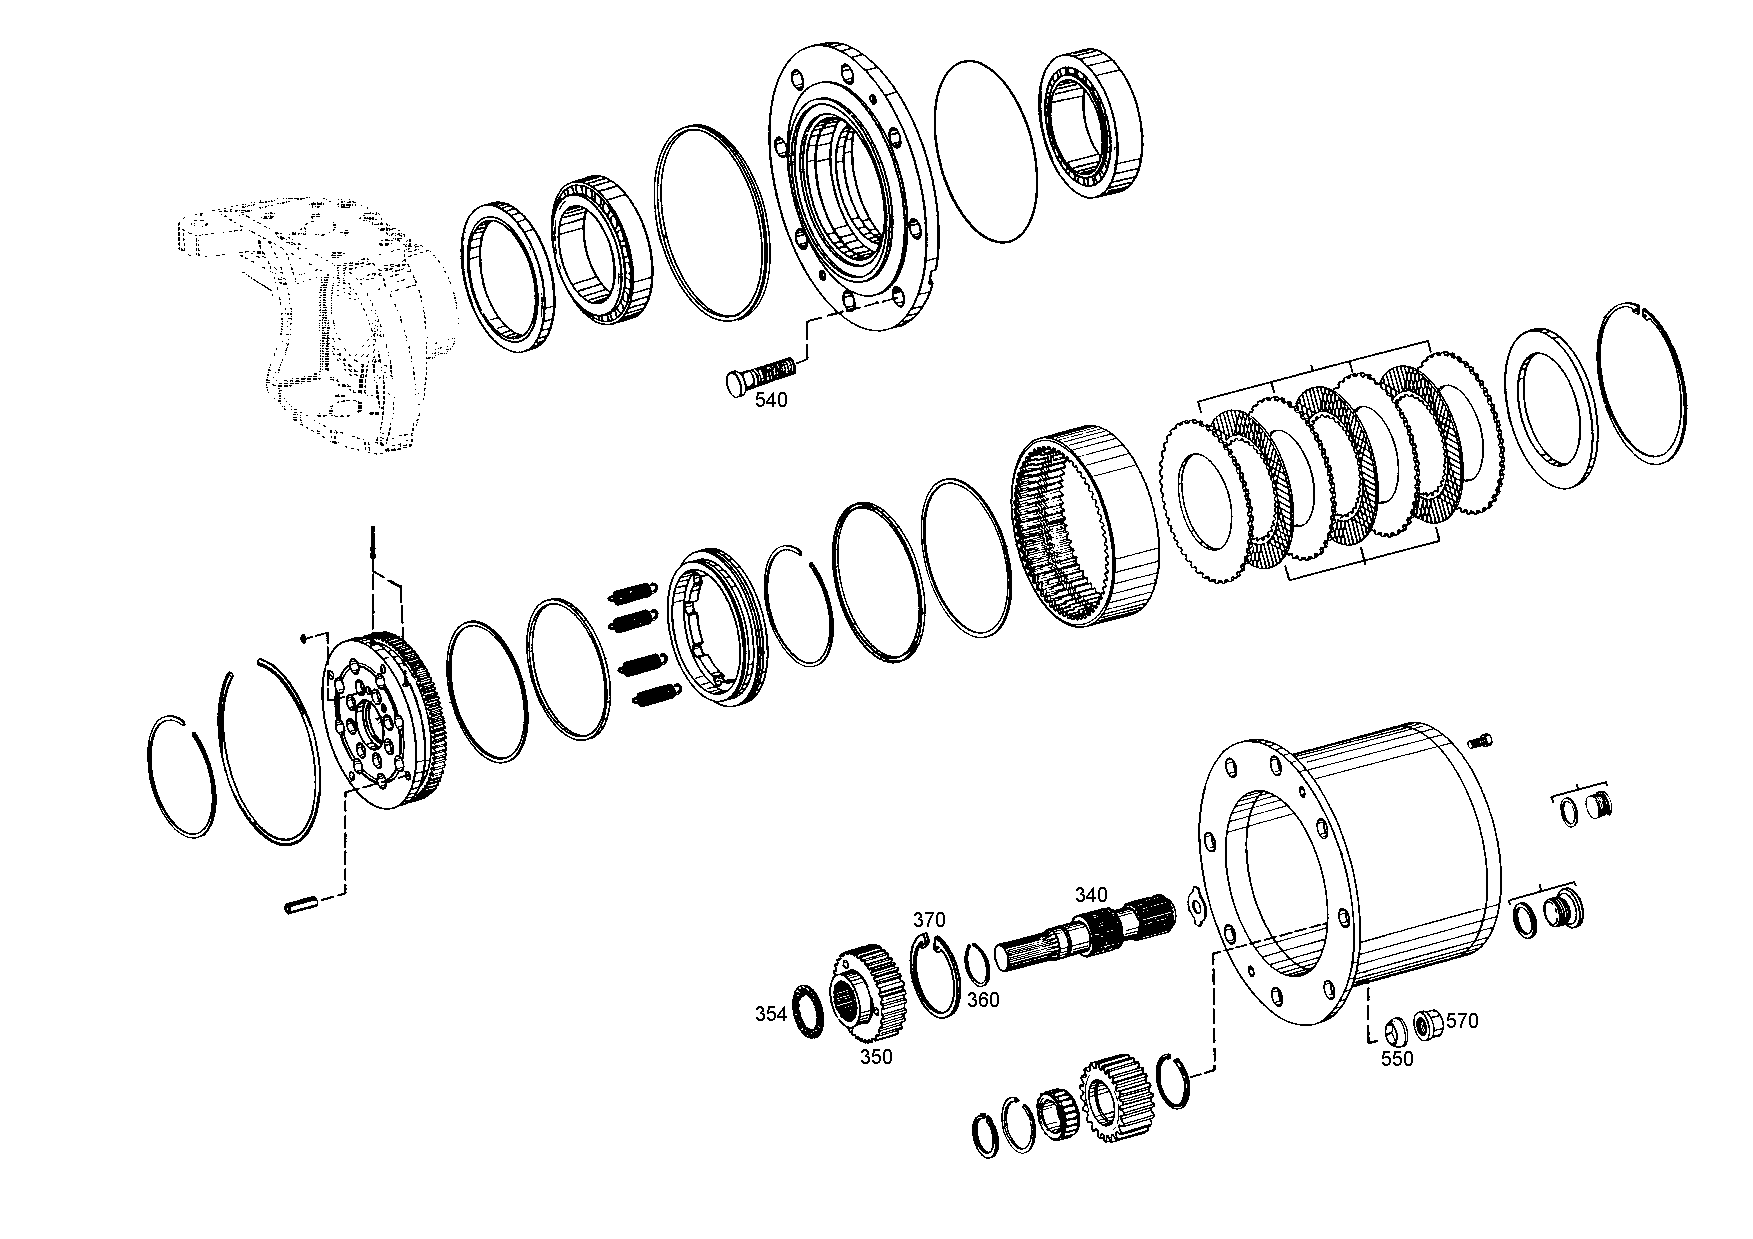 drawing for DOOSAN 0630 307 004 - SPRING WASHER (figure 2)